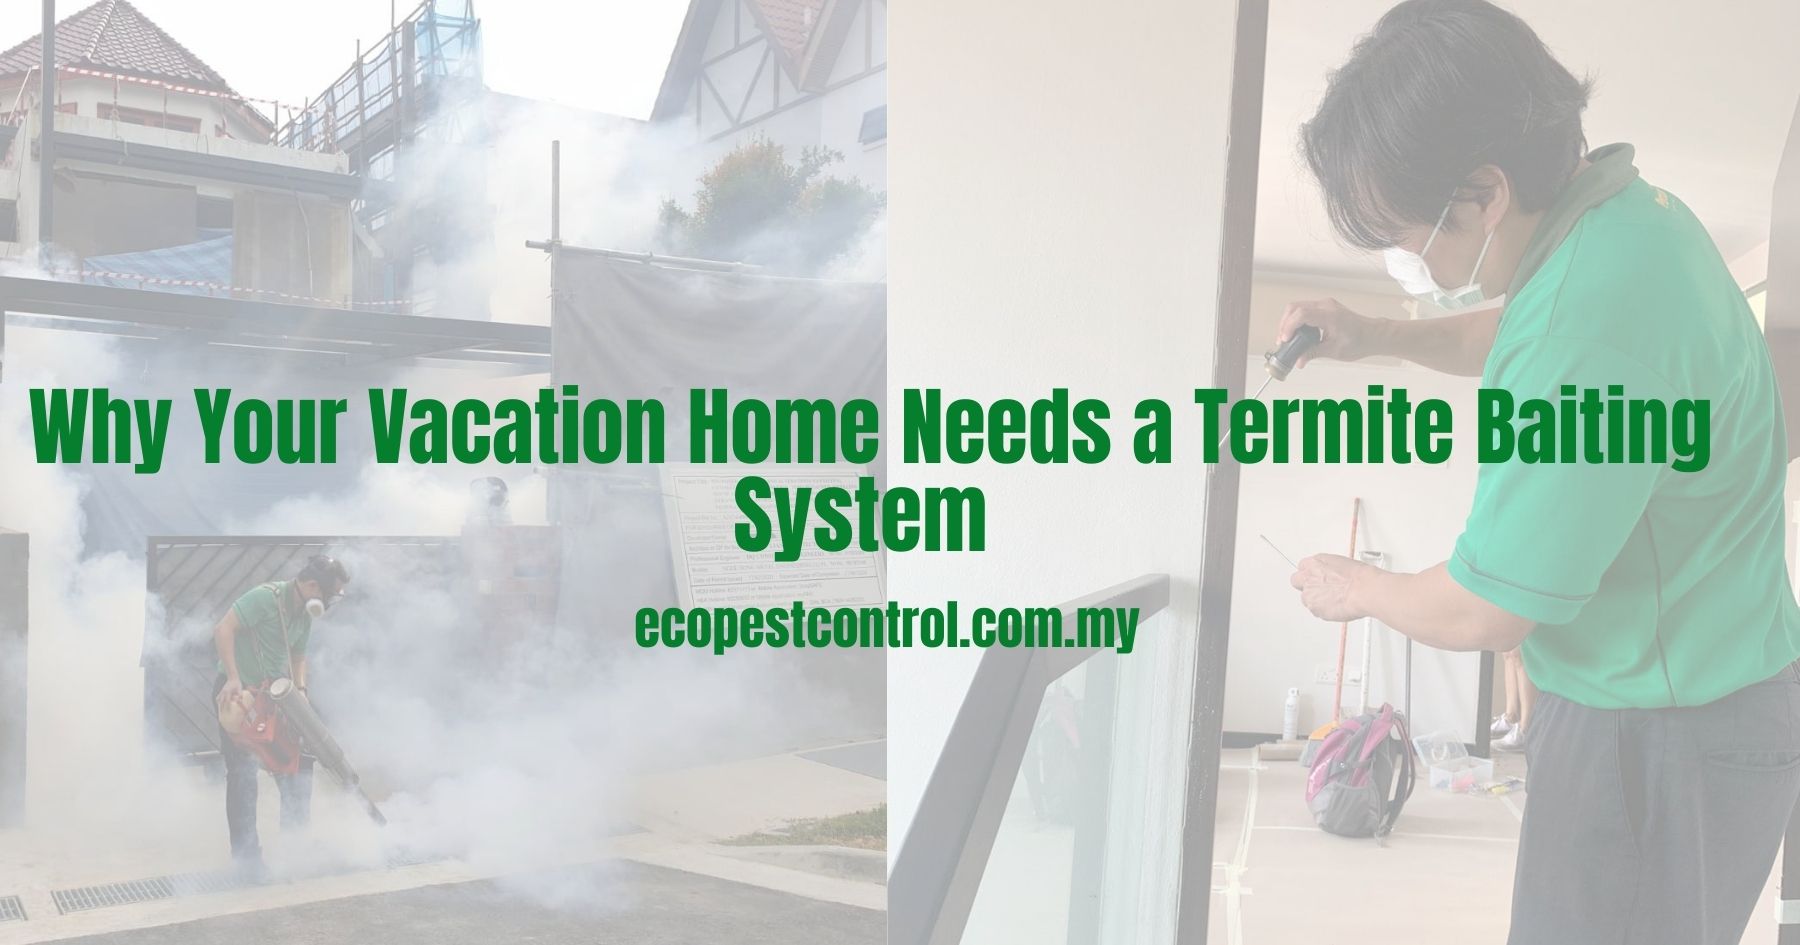 Why Your Vacation Home Needs a Termite Baiting System